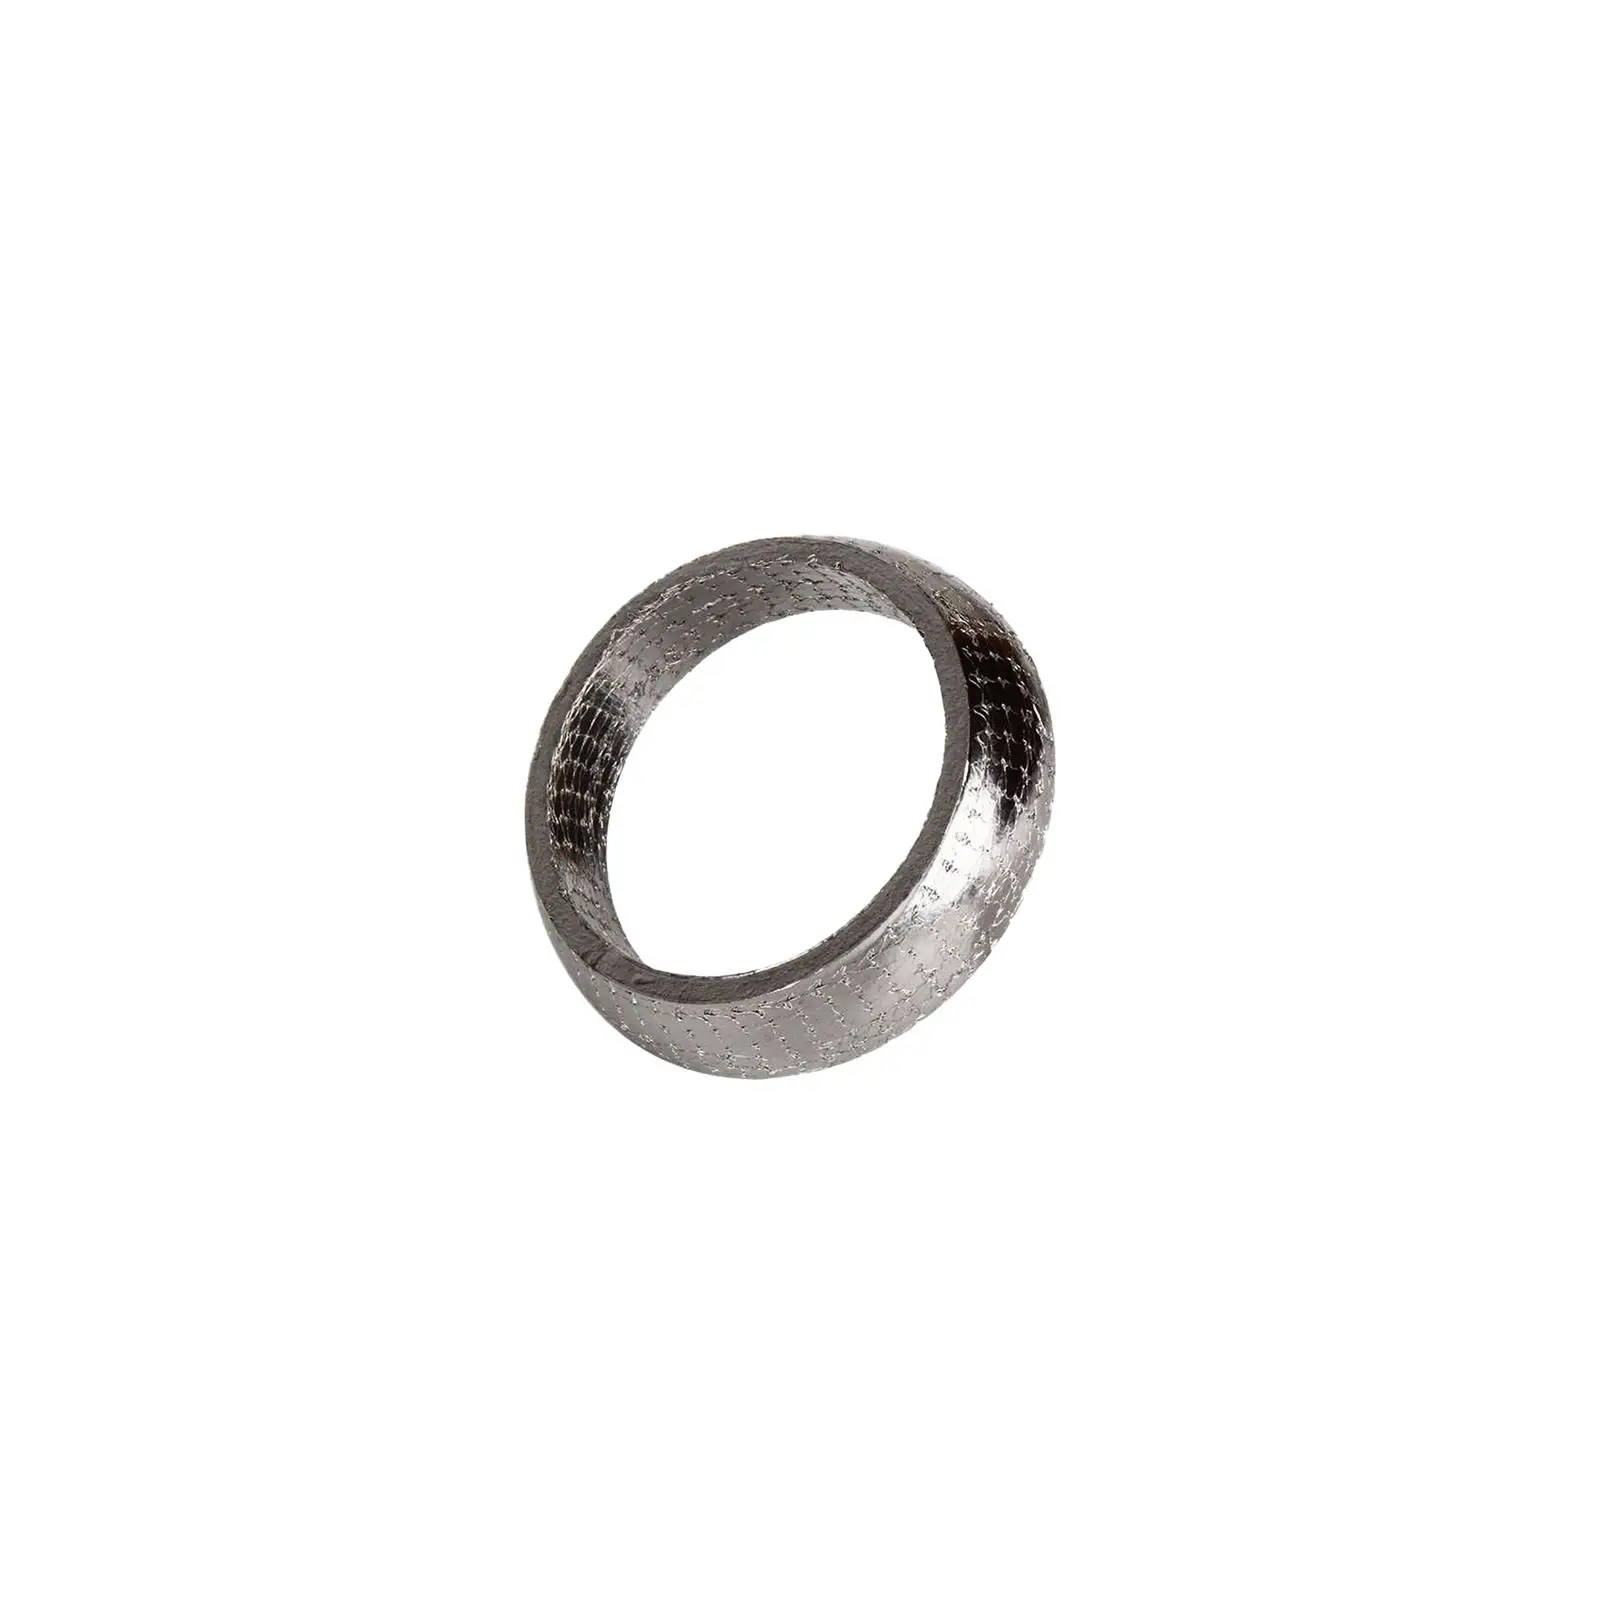 Graphite Gasket Stainless Steel Replacements to Adapter Donut